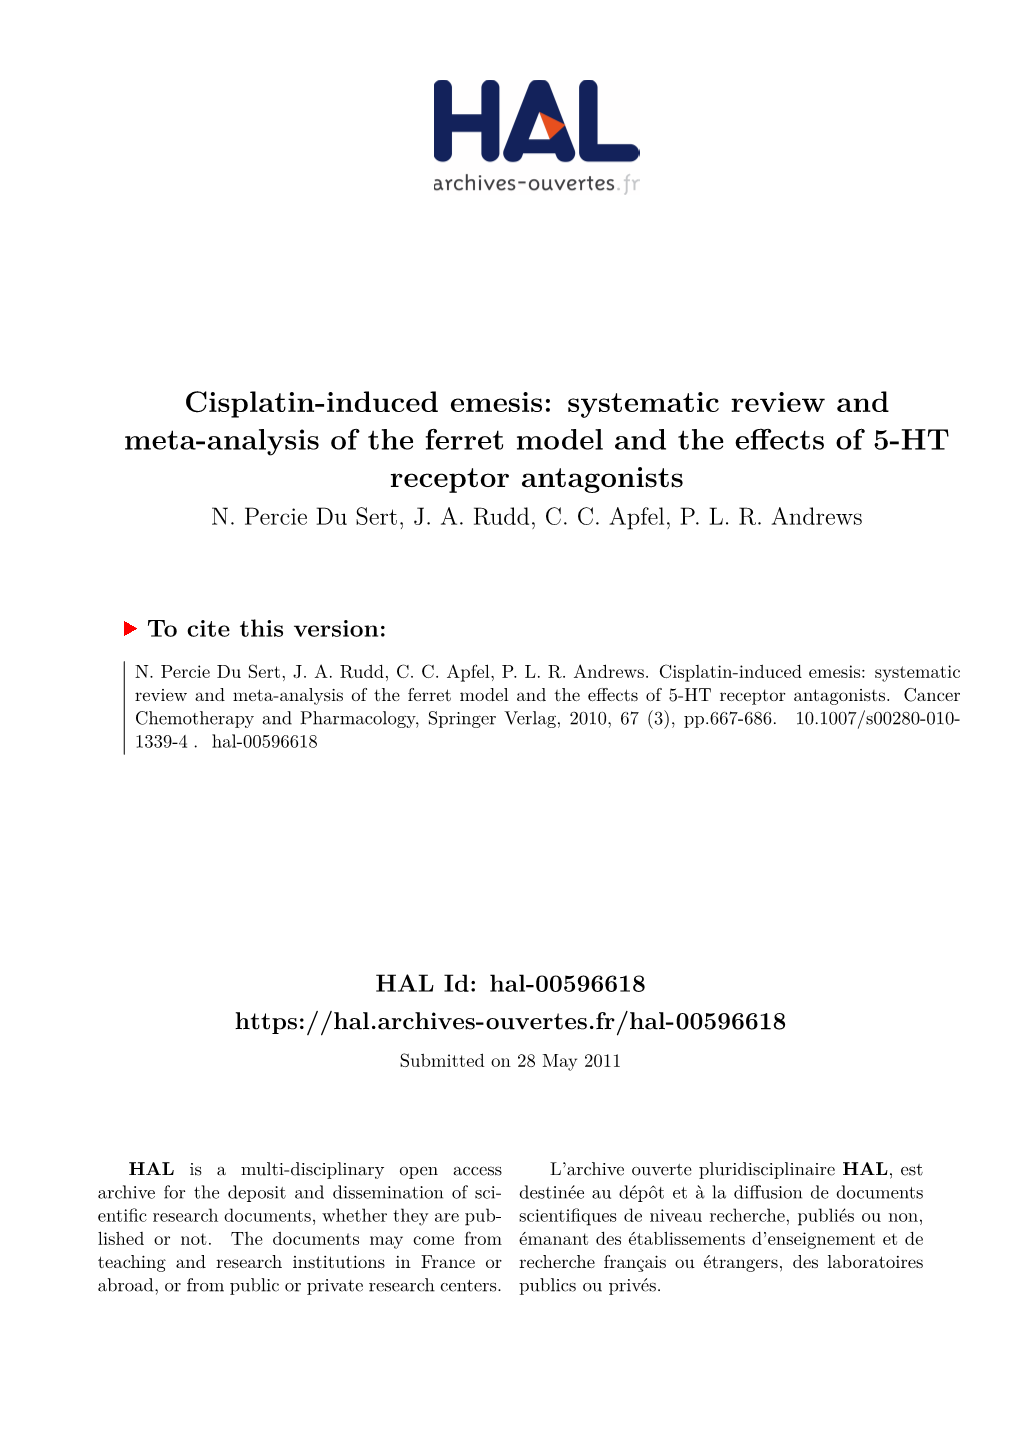 Cisplatin-Induced Emesis: Systematic Review and Meta-Analysis of the Ferret Model and the Effects of 5-HT Receptor Antagonists N